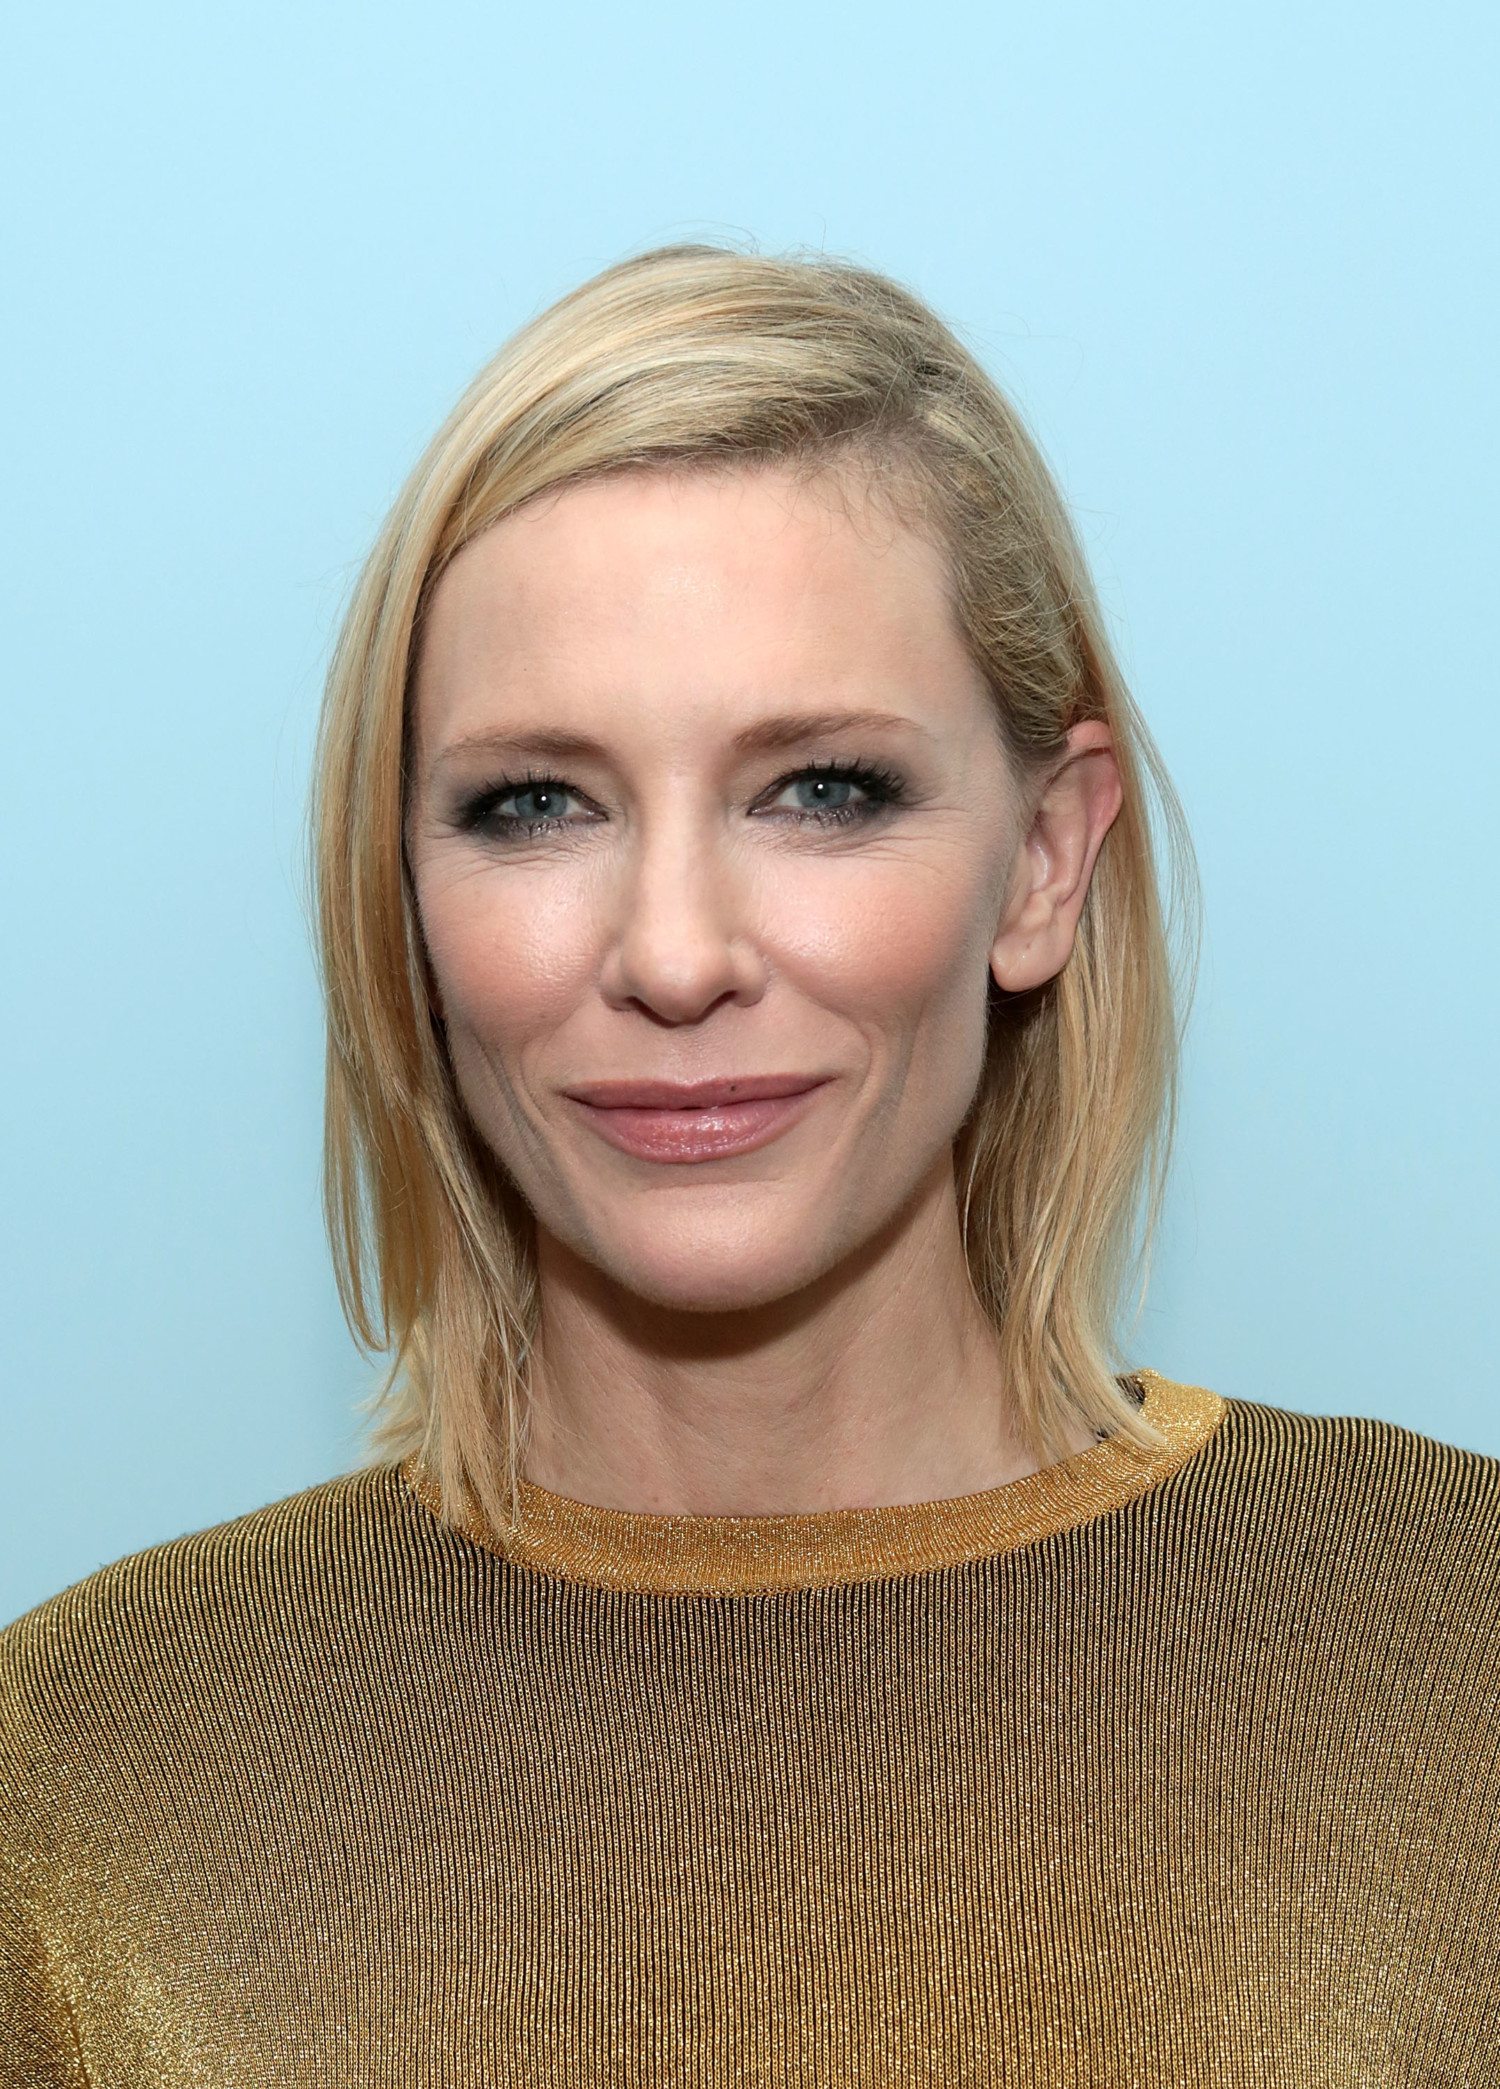 NEW YORK, NY - NOVEMBER 29: Actress Cate Blanchett attends the Pedro Almodovar Retrospective Opening Night at the Museum of Modern Art on November 29, 2016 in New York City. (Photo by Jason Carter Rinaldi/Getty Images for Museum of Modern Art, Department of Film)